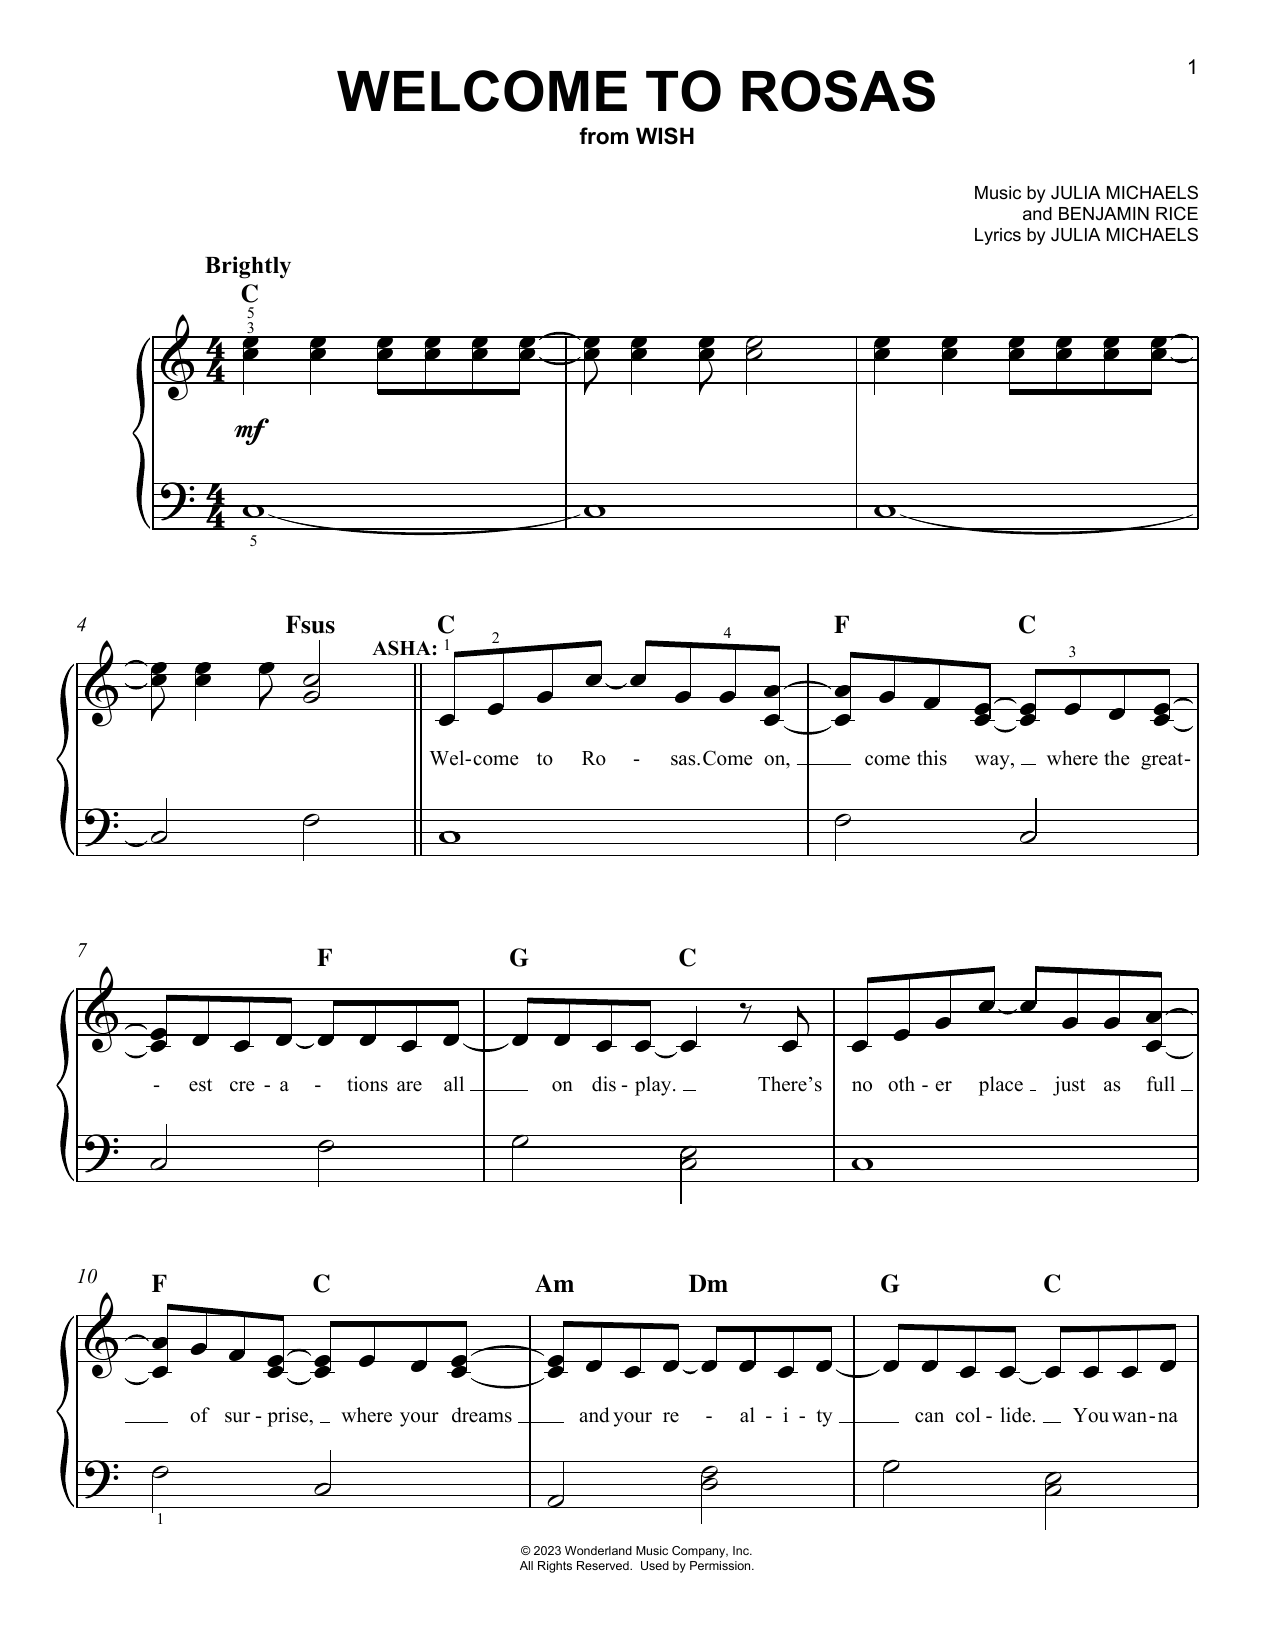 Ariana DeBose and The Cast Of Wish Welcome to Rosas (from Wish) sheet music notes printable PDF score